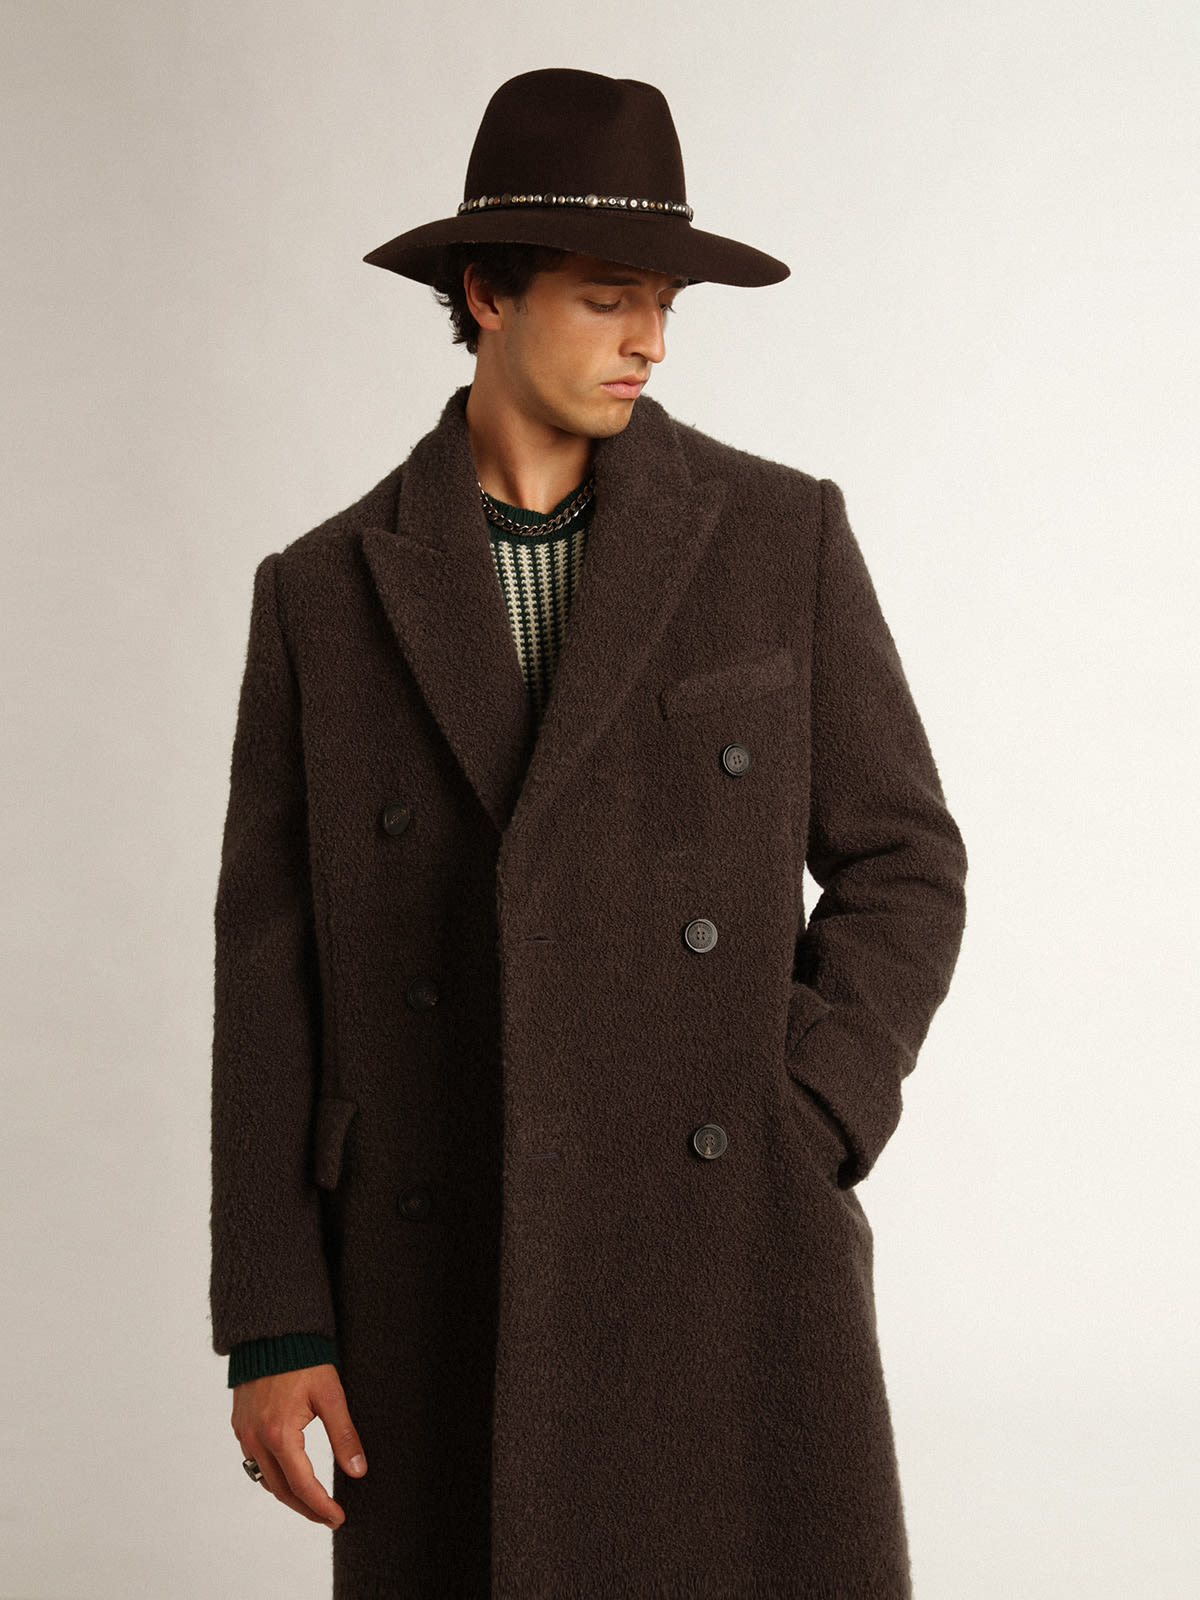 Golden Goose - Men's double-breasted coat in licorice-colored bouclé wool in 